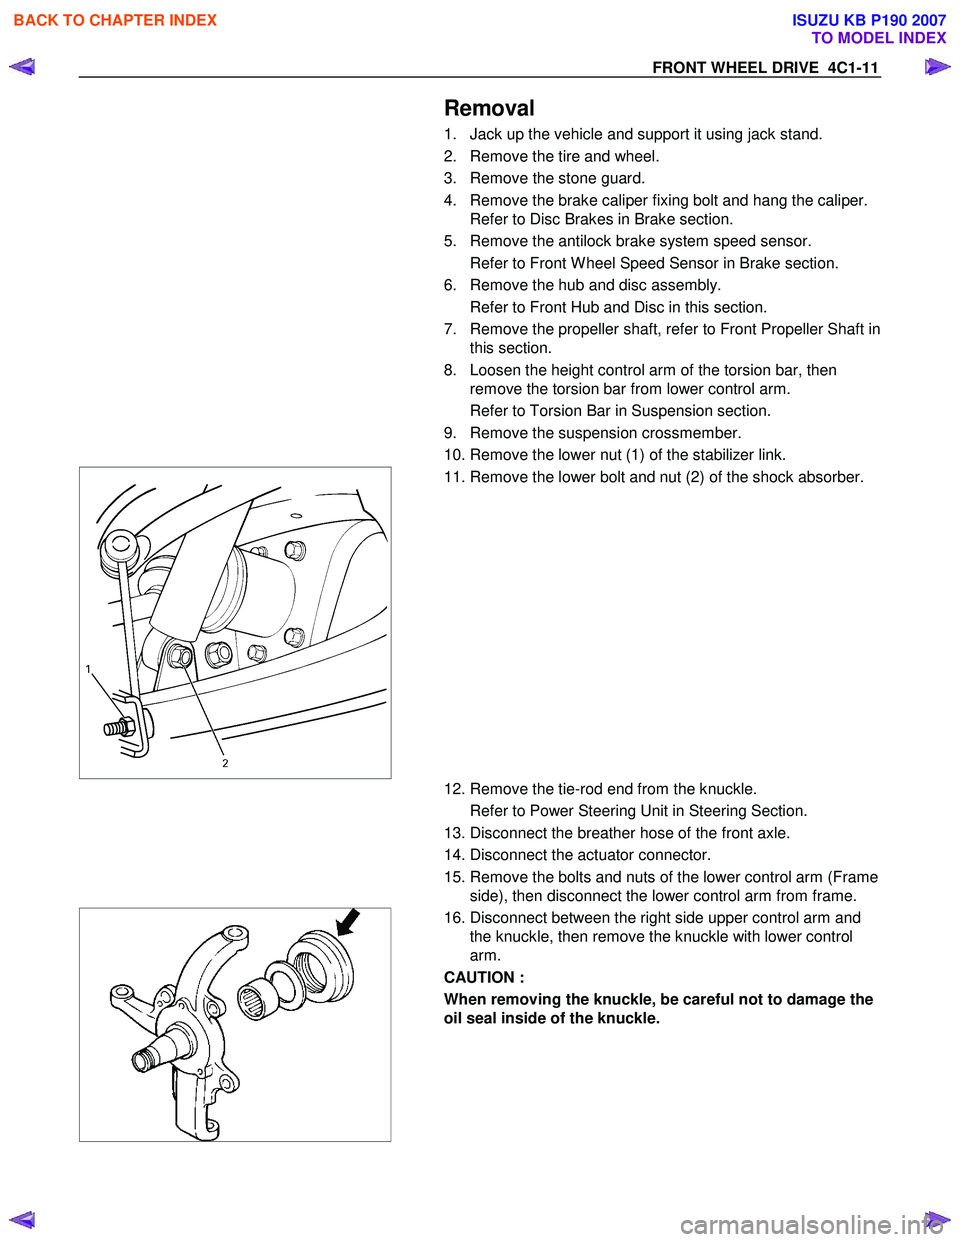 ISUZU KB P190 2007  Workshop User Guide FRONT WHEEL DRIVE  4C1-11 
  
Removal 
1.  Jack up the vehicle and support it using jack stand.  
2.  Remove the tire and wheel. 
3.  Remove the stone guard. 
4.  Remove the brake caliper fixing bolt 